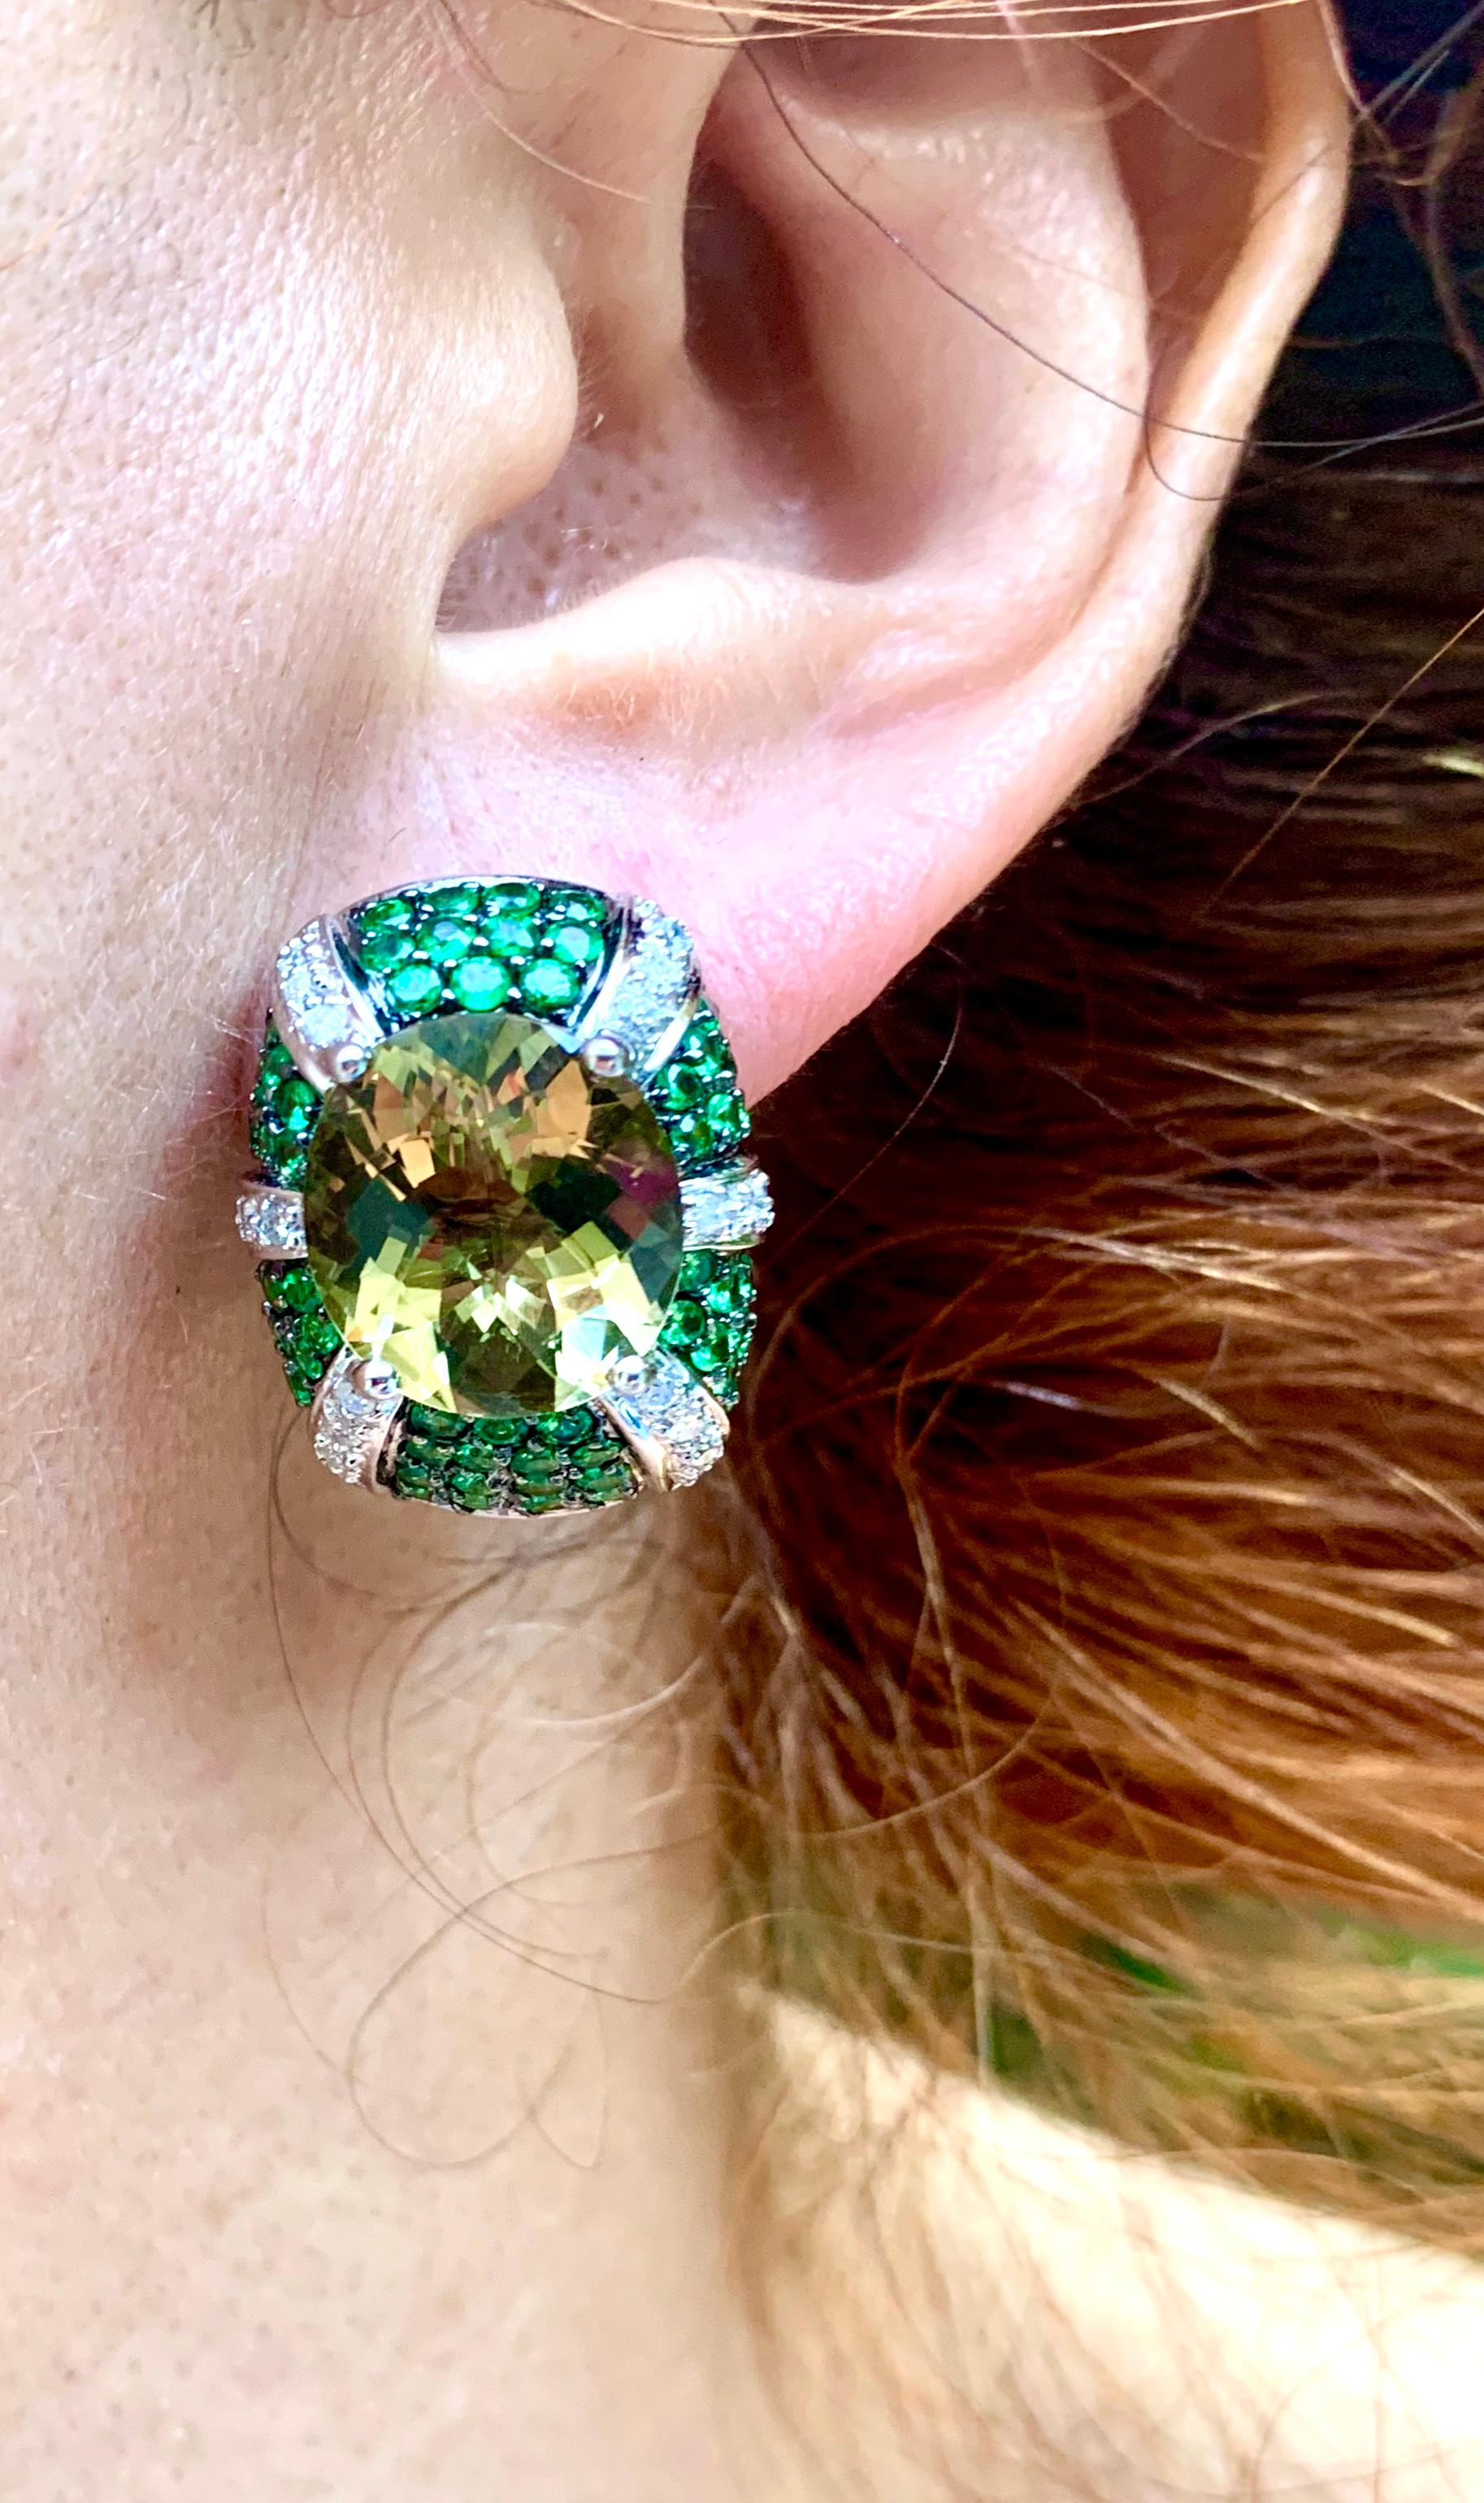 Lively, festive, eye catching Art Deco style flower form Tsavorite garnet, diamond and Lemon quartz earrings with the central stones measuring approximately 13.6mm by 11.8mm. The fine Lemon Quartz is very reminiscent of good colored diamonds at at